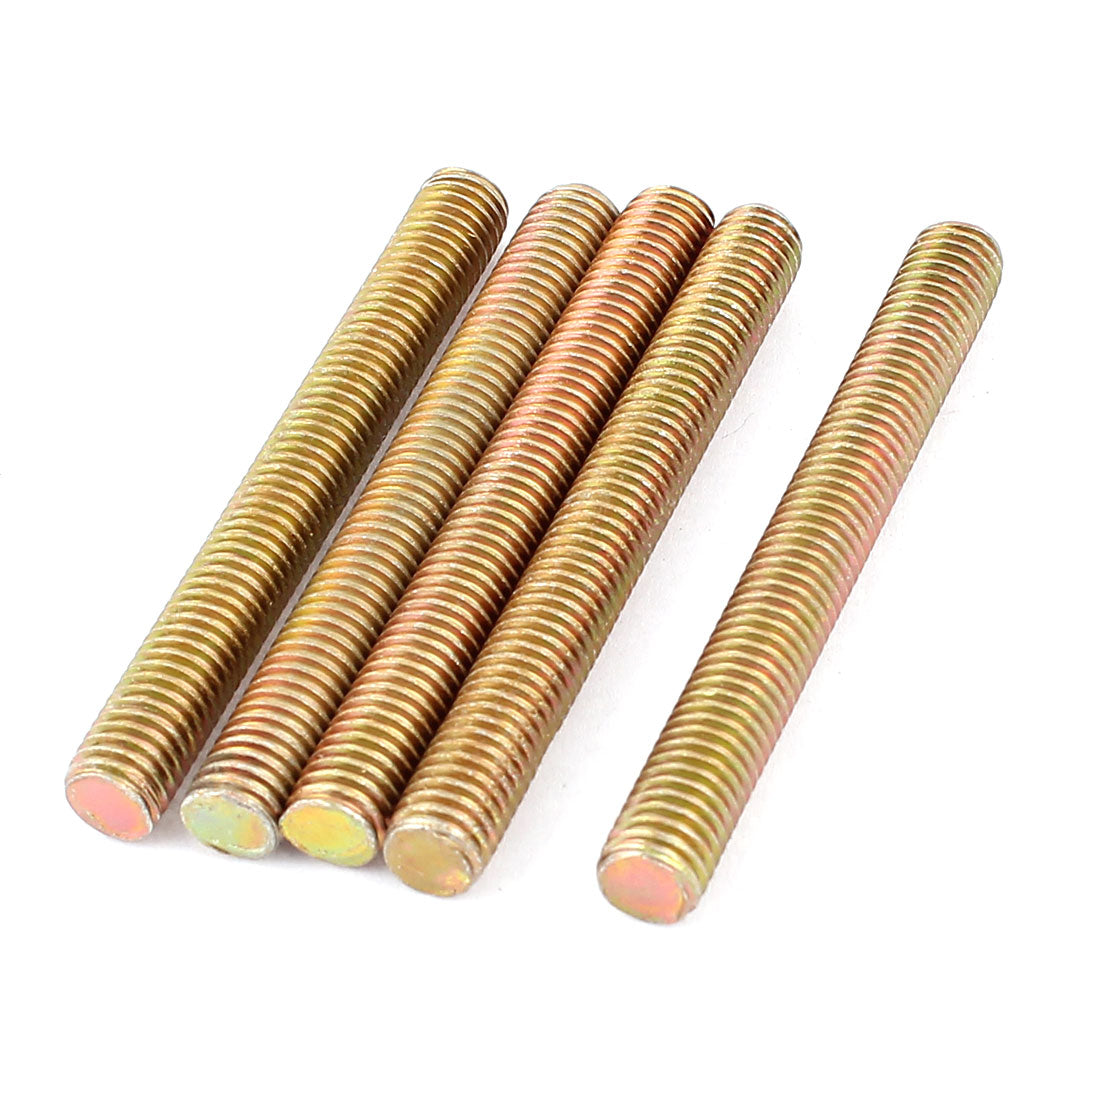 uxcell Uxcell 1.25mm Pitch M8 x 70mm Metal Male Threaded Rod Bar Bronze Tone 5 Pcs